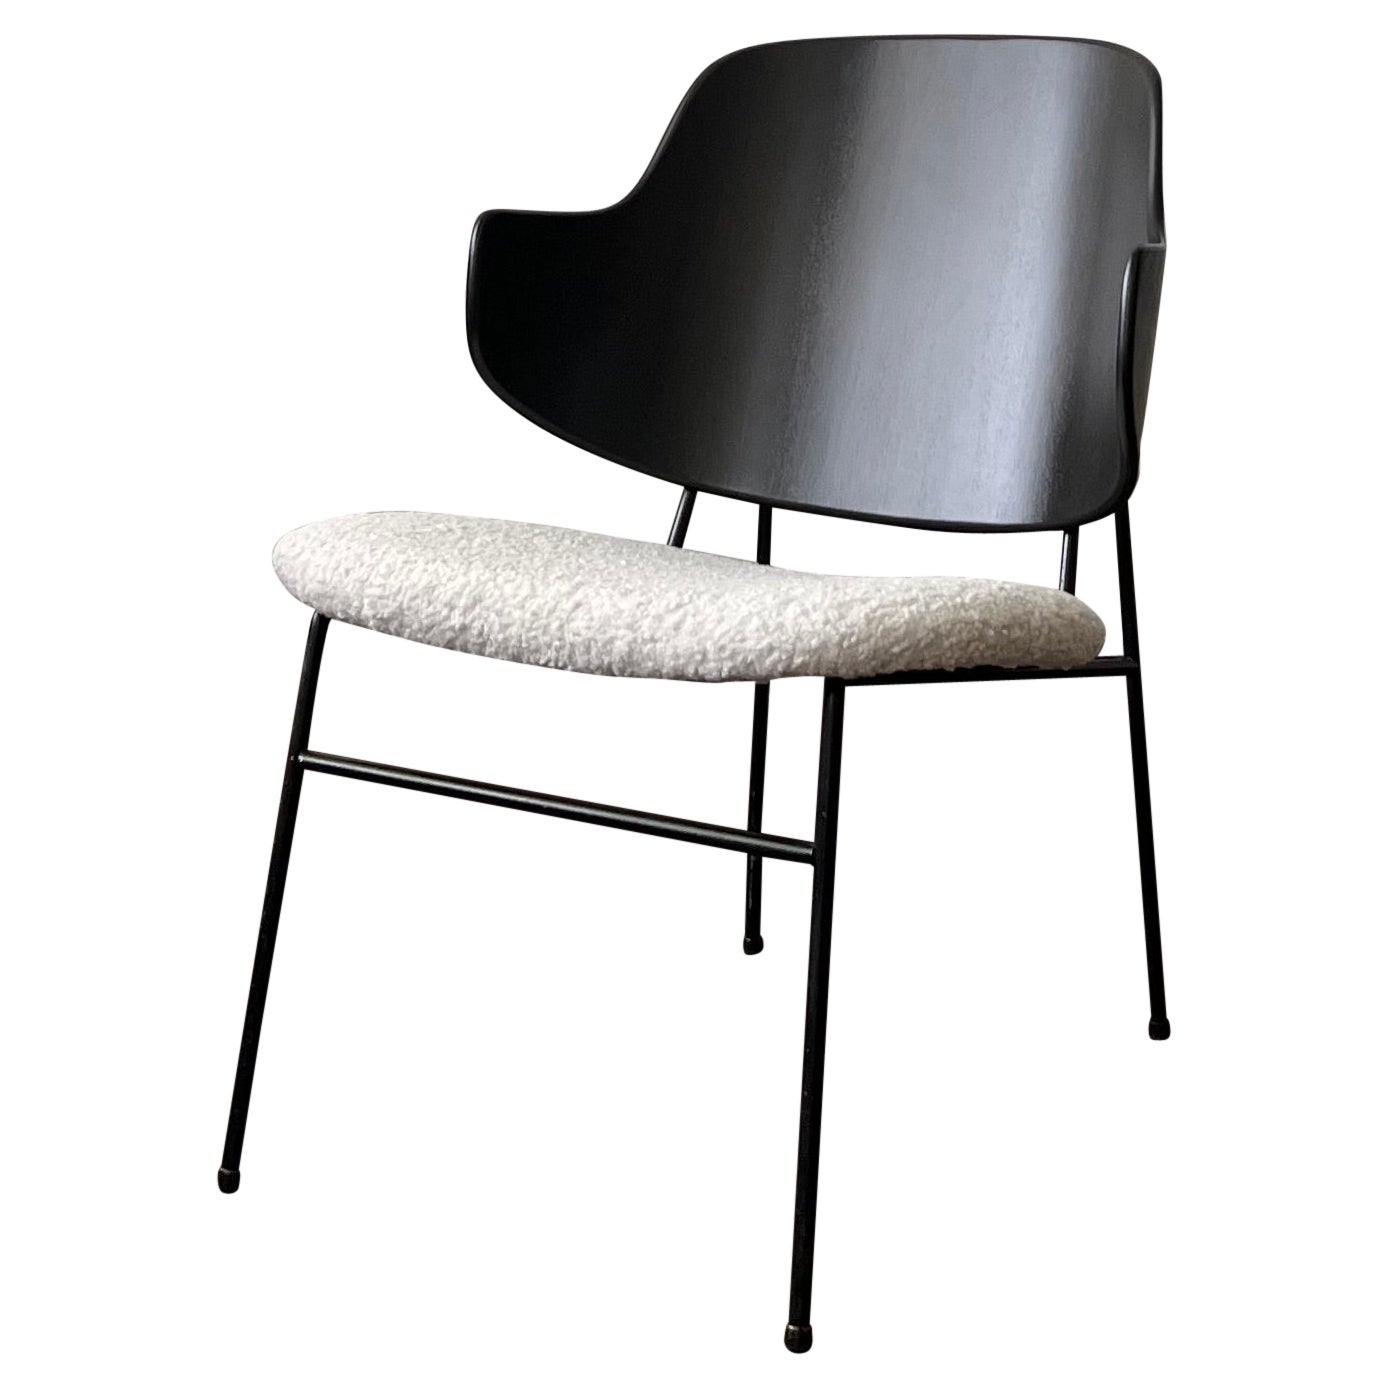 Penguin Lounge Chair by Ib Kofod-Larsen for Selling